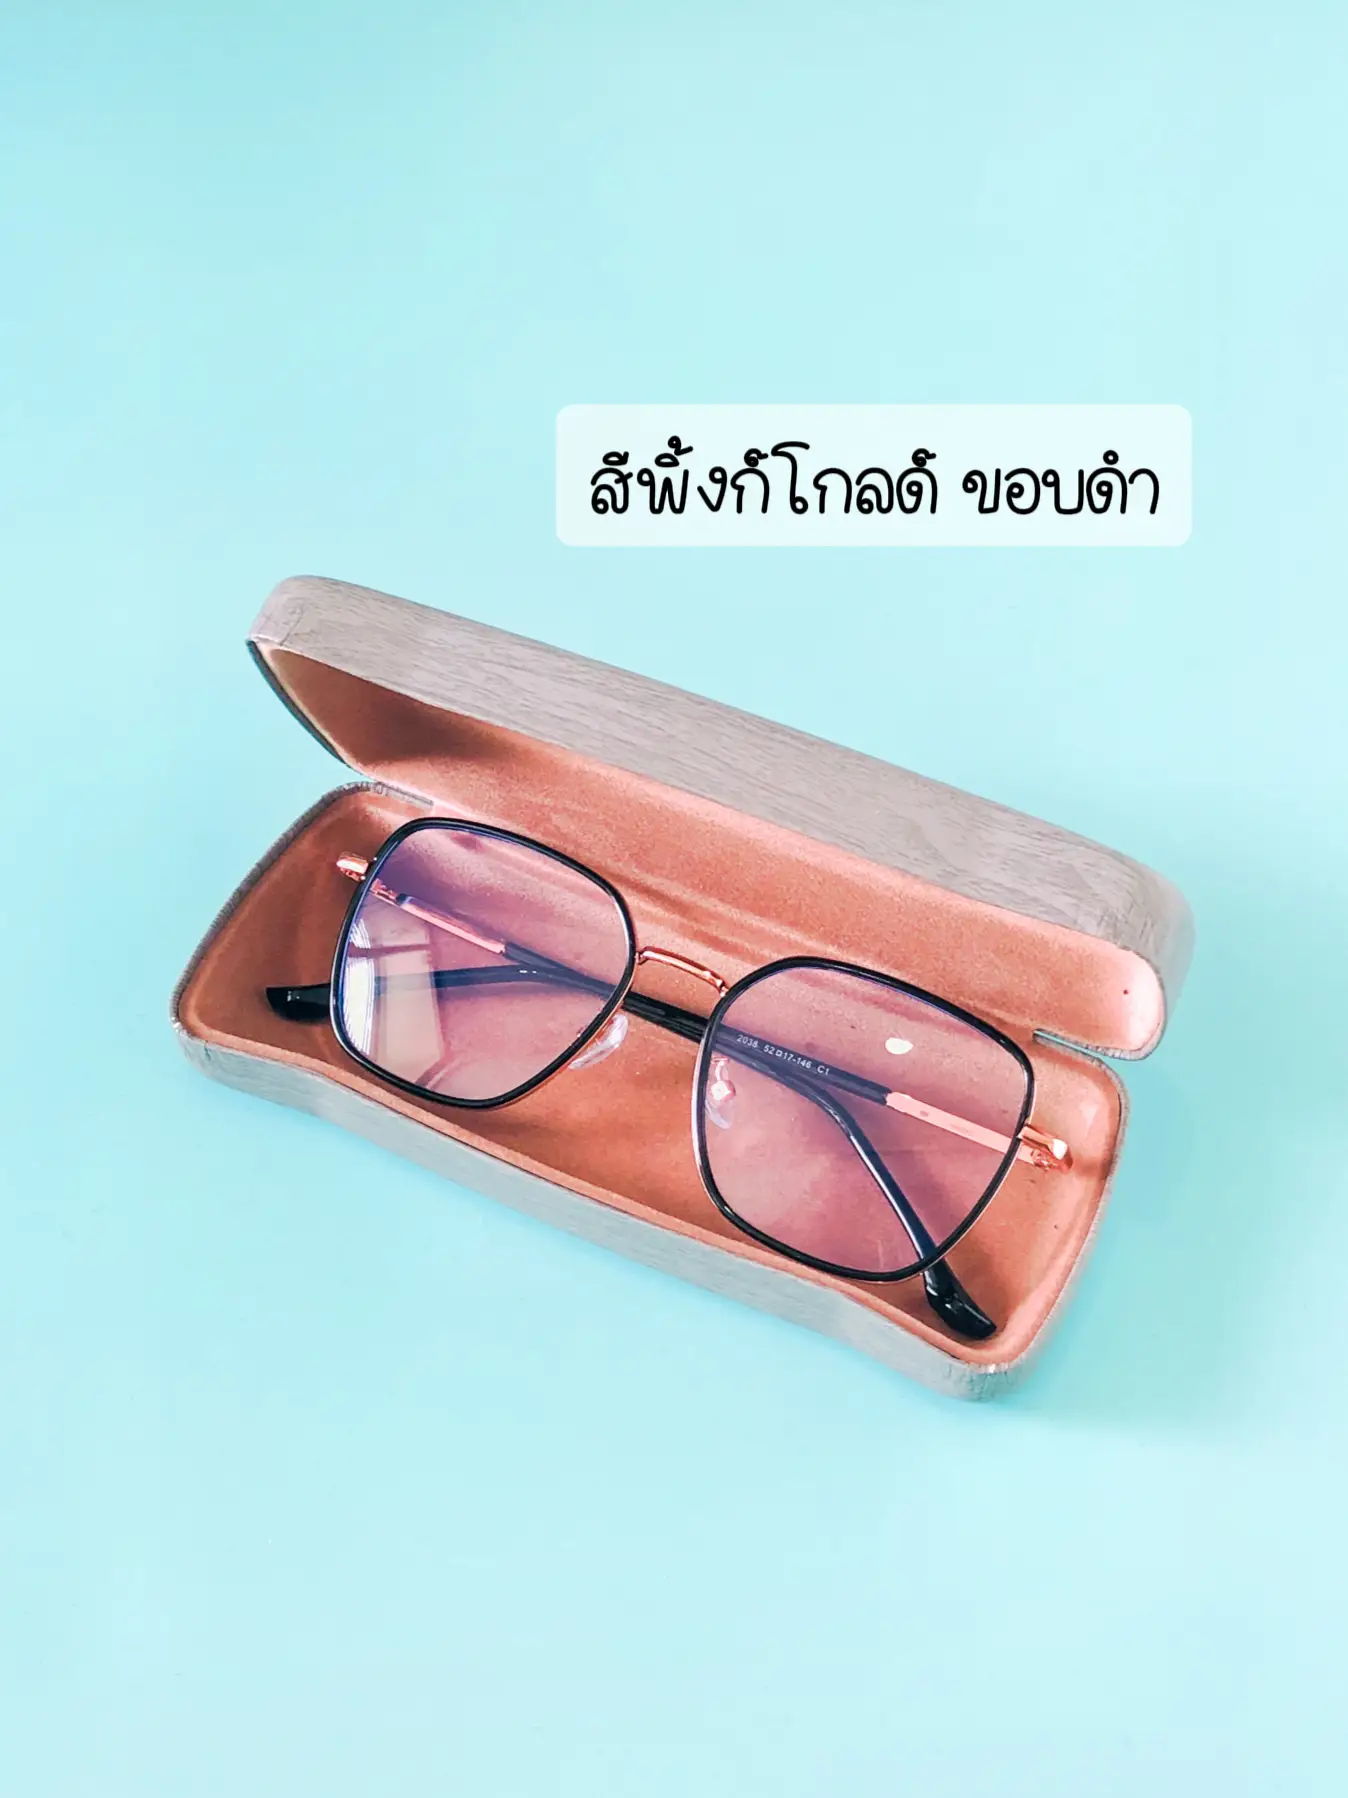 Eyewear Shop Reviews, Coordinates, Affordable, Cute Merchant, Gallery  posted by TIK EVERYDAY.TH